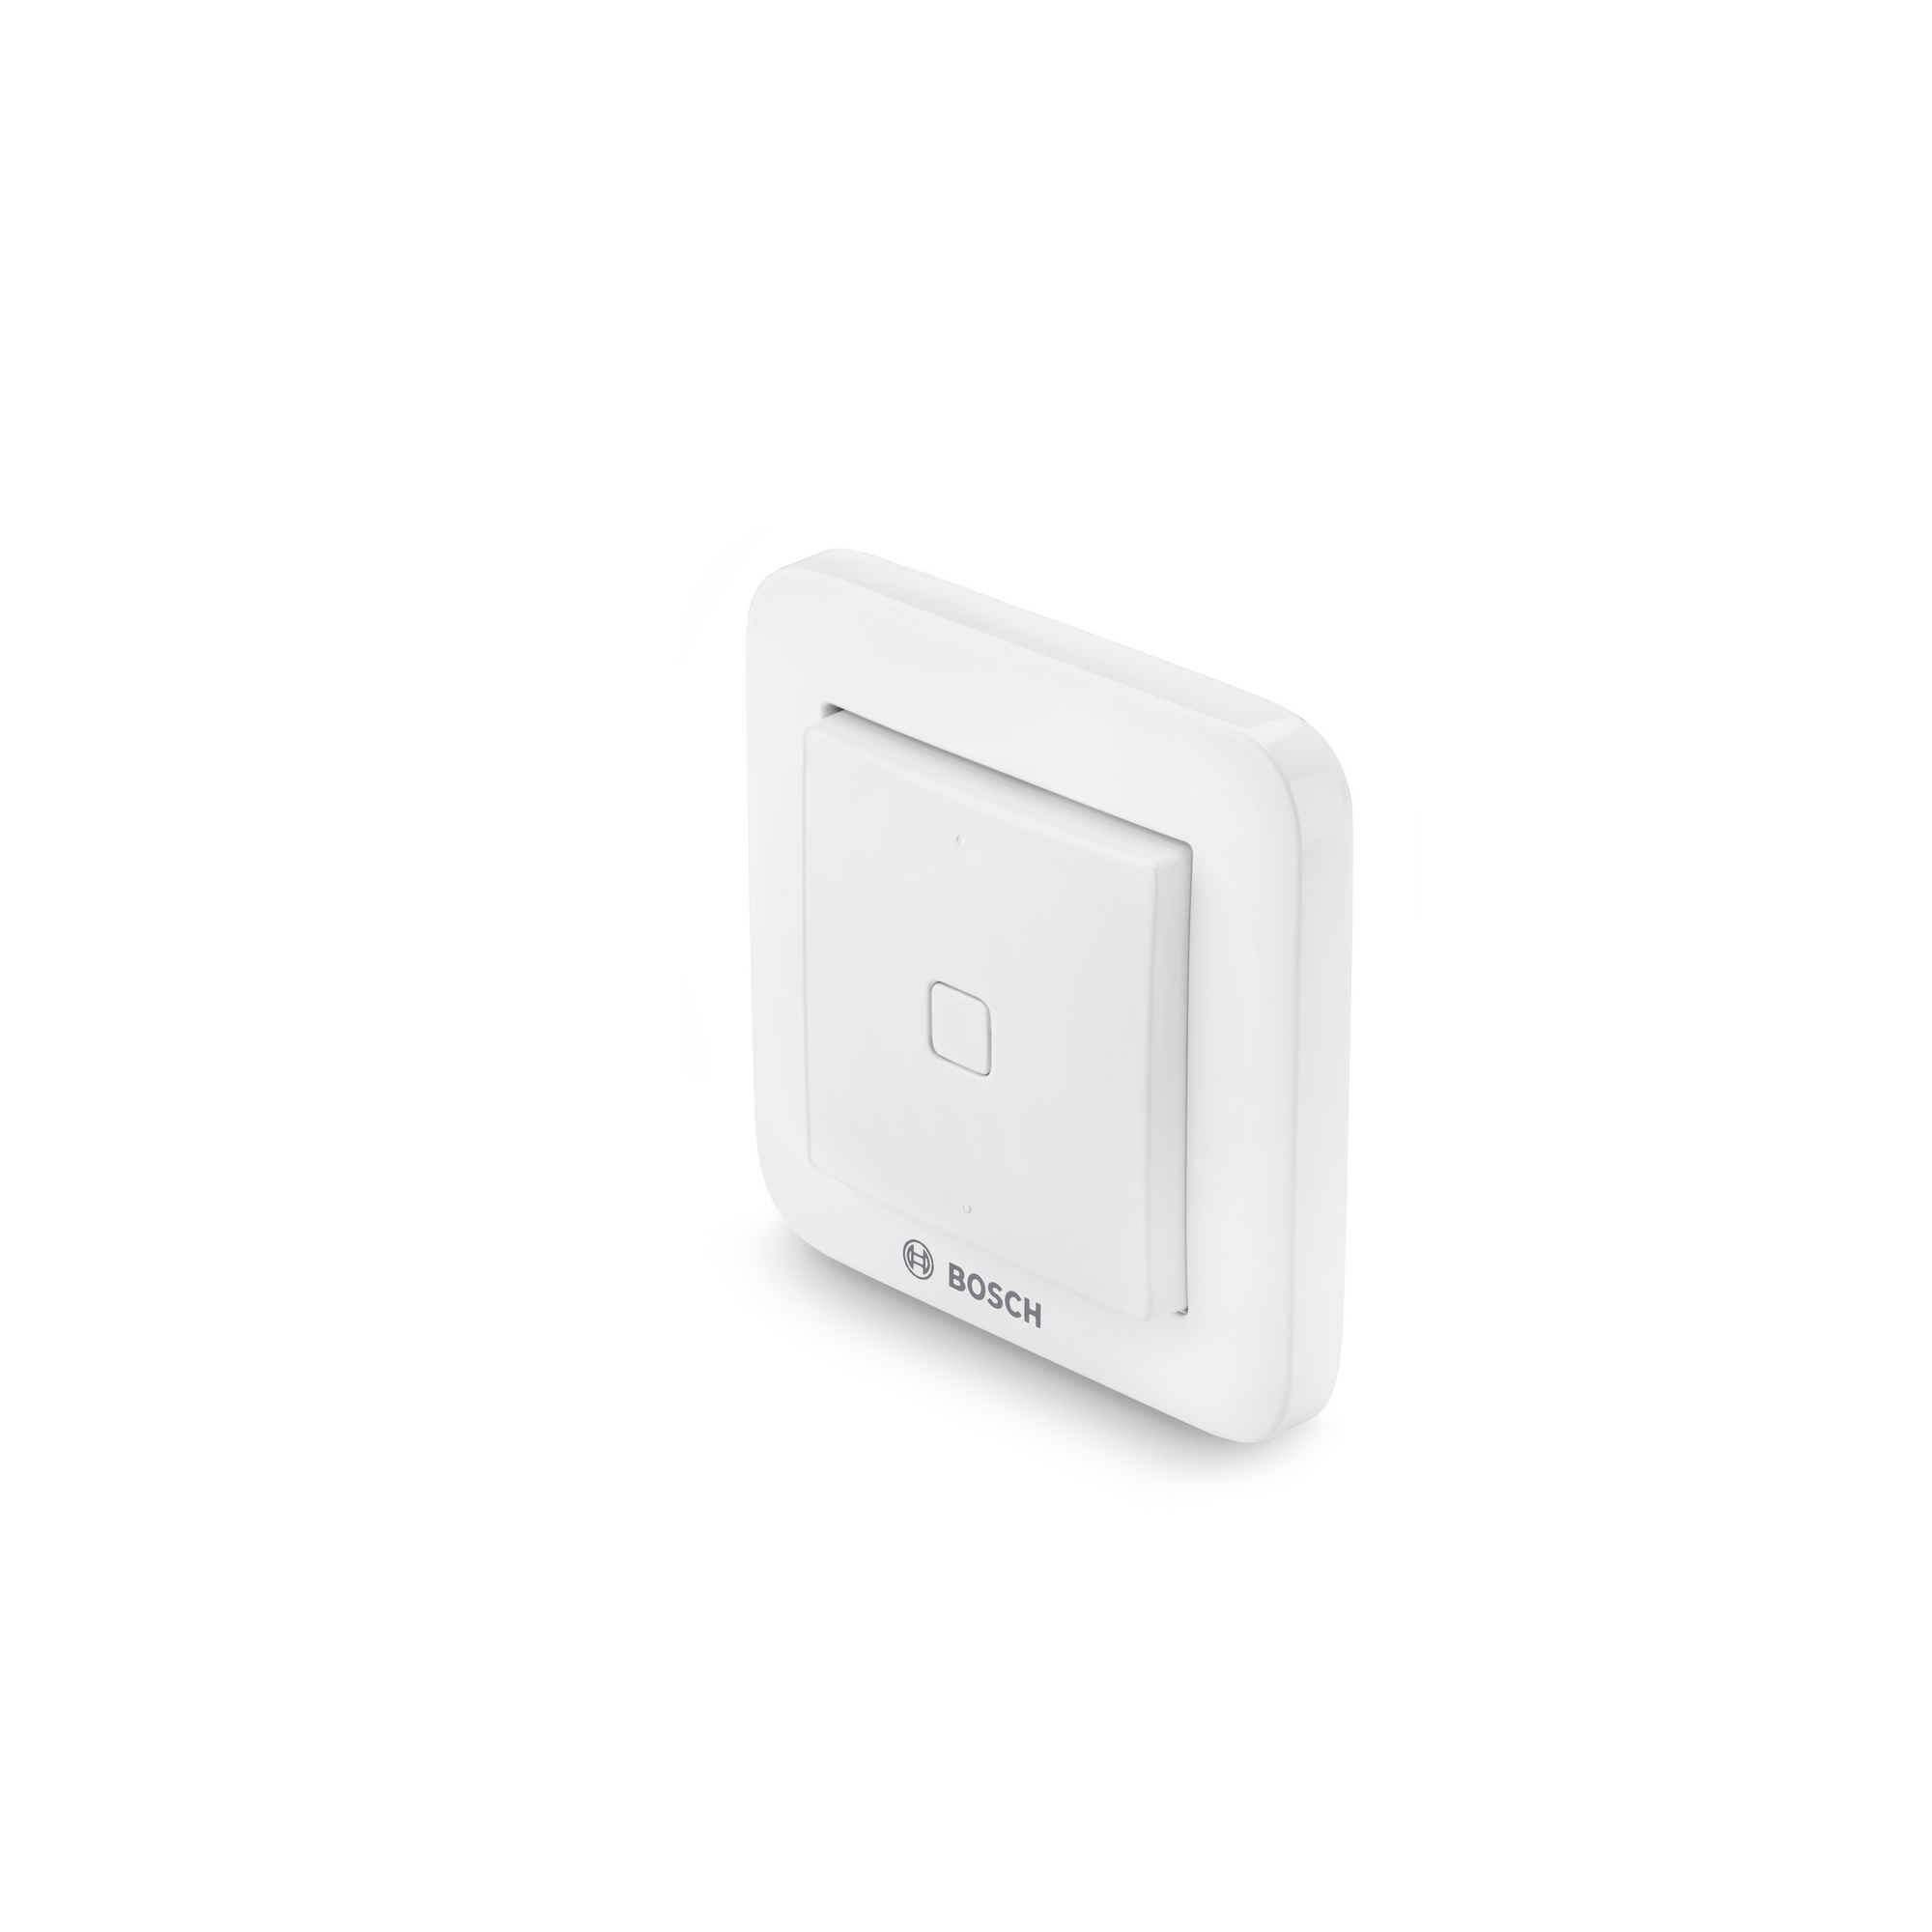 Smart Home Universalschalter + product picture